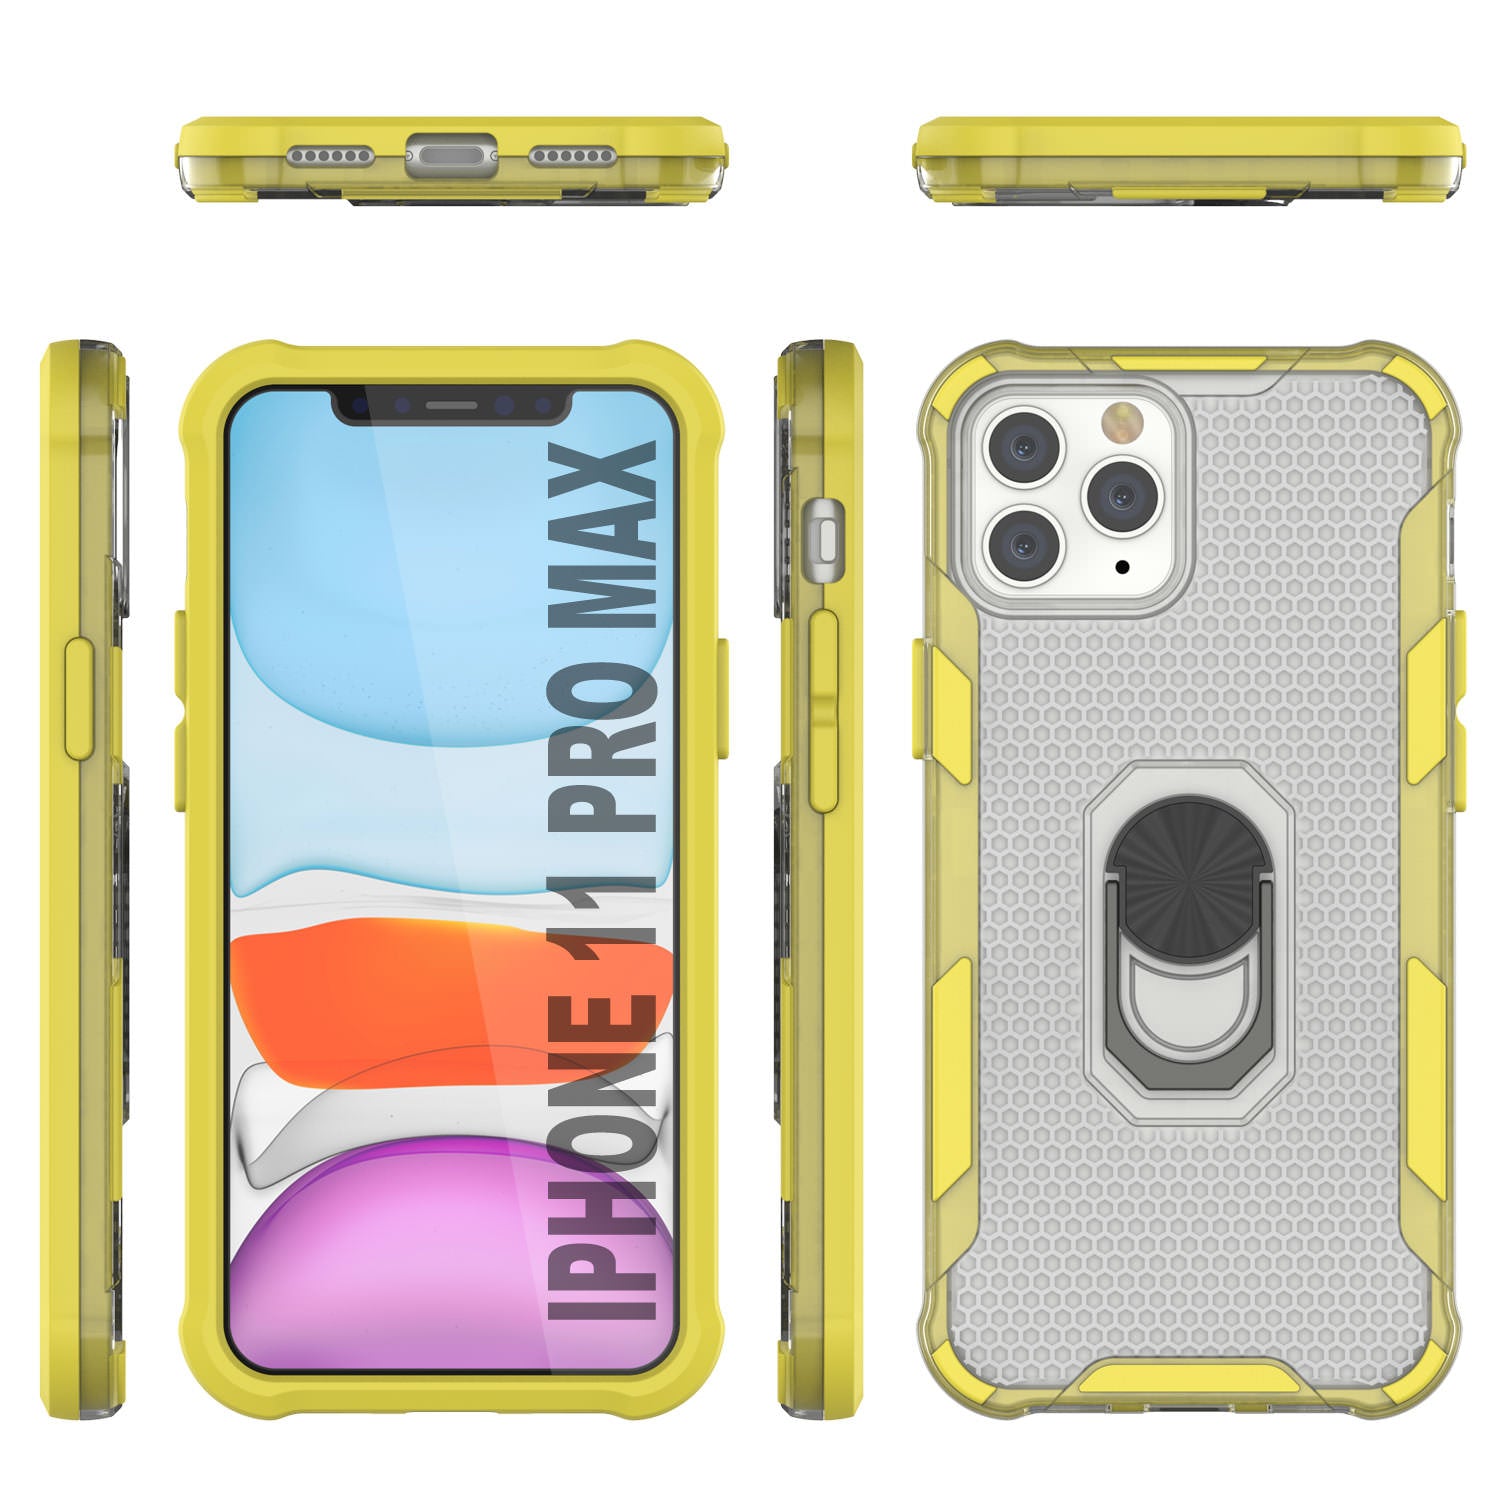 PunkCase for iPhone 11 Pro Max Case [Magnetix 2.0 Series] Clear Protective TPU Cover W/Kickstand [Yellow]